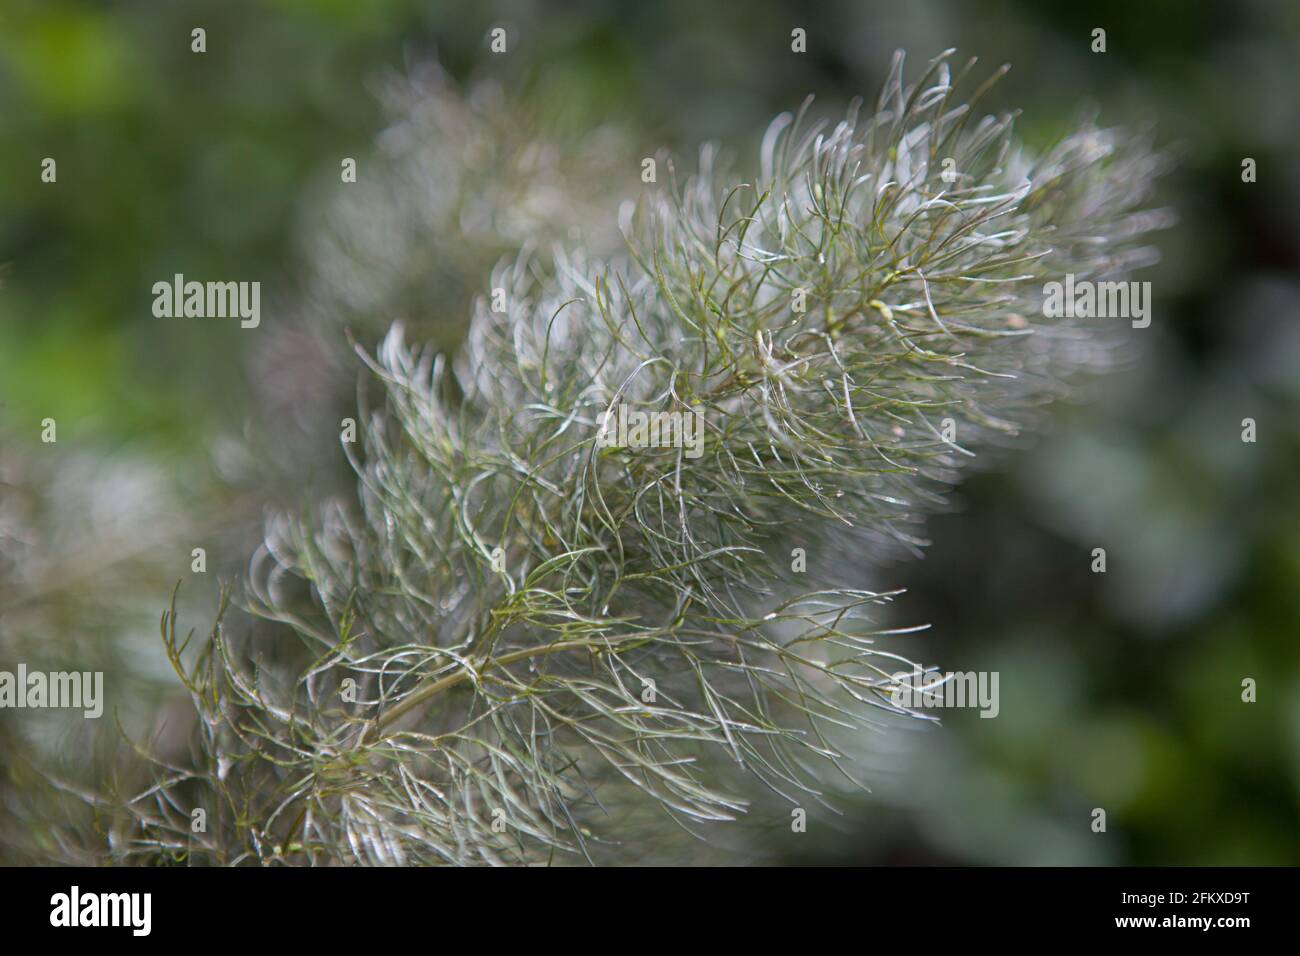 The feathery leaves of the fennel (Foeniculum vulgare) plant, commonly used as an aromatic and culinary herb. Stock Photo